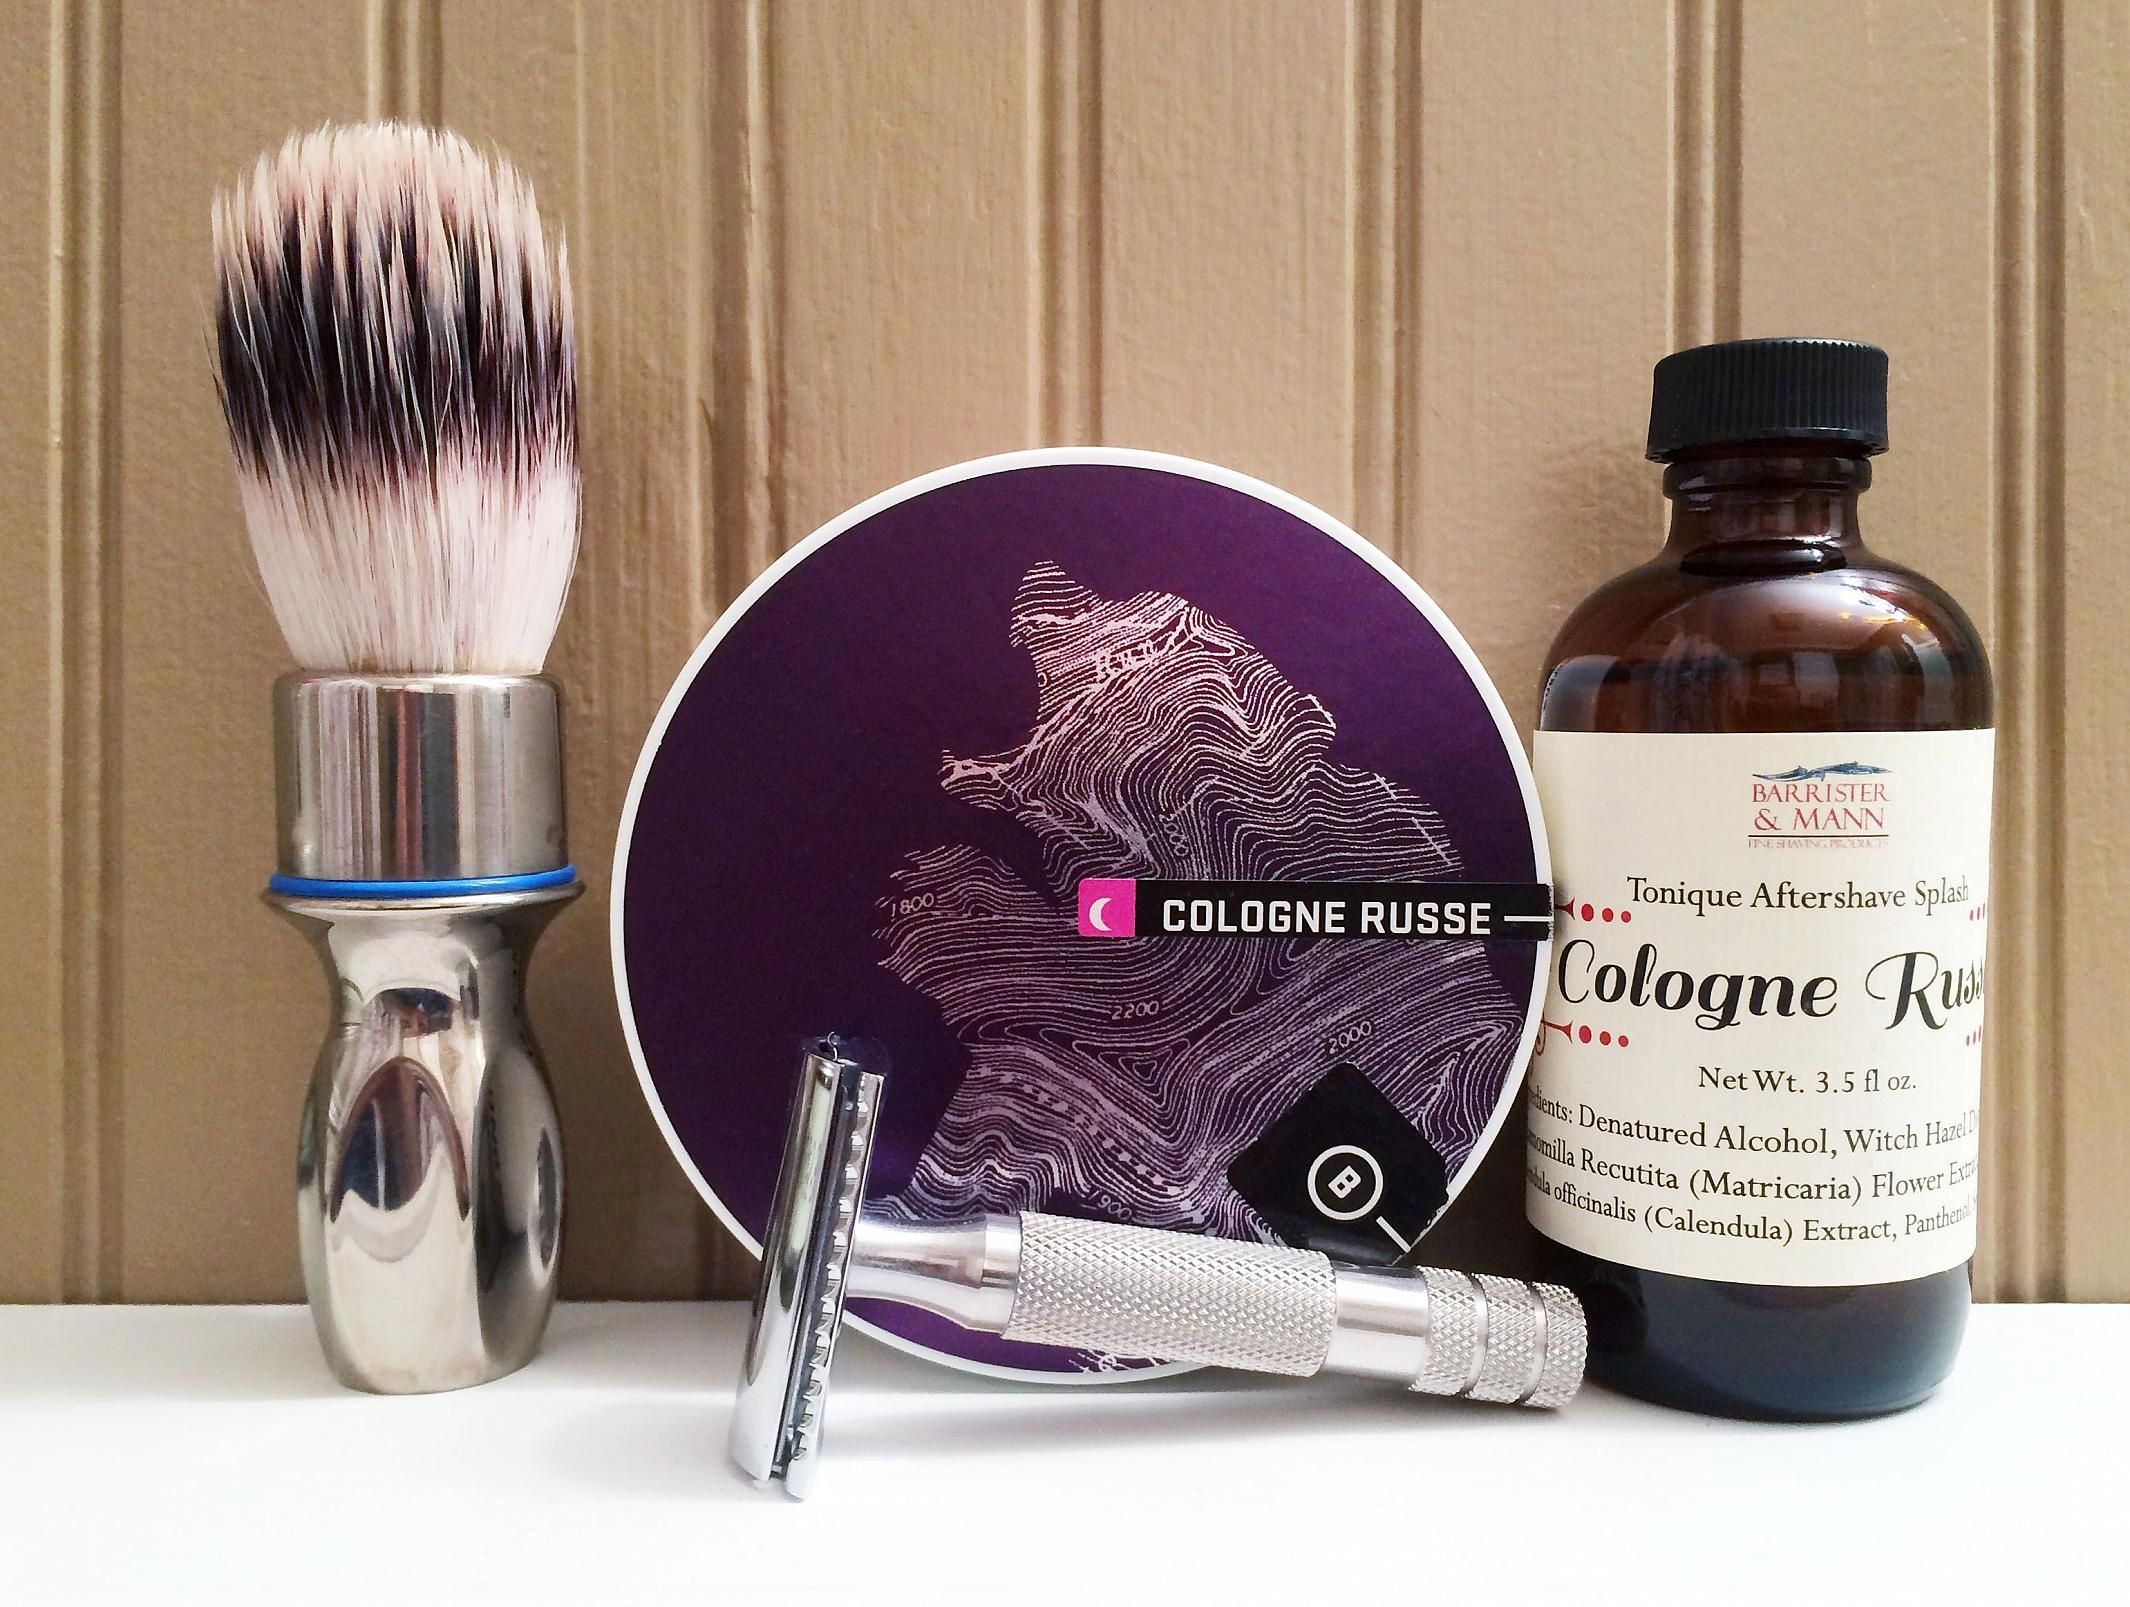 Barrister and Mann "Cologne Russe"